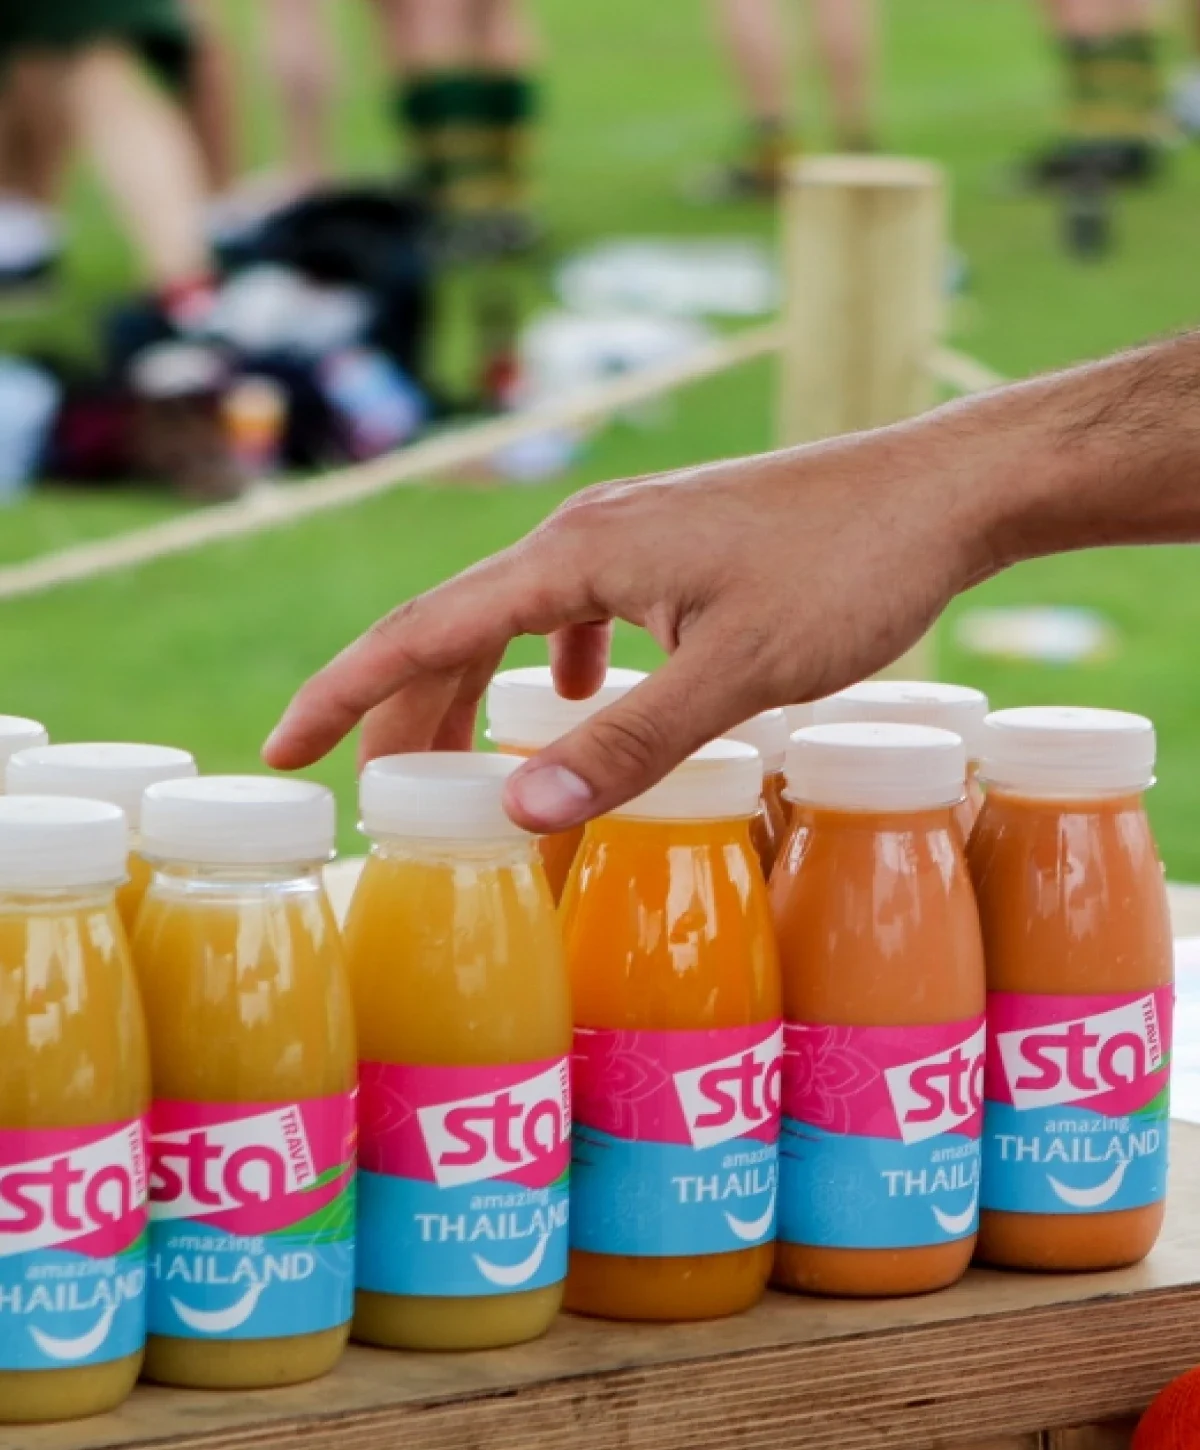 A collection of branded juice bottles with the STA logo on them